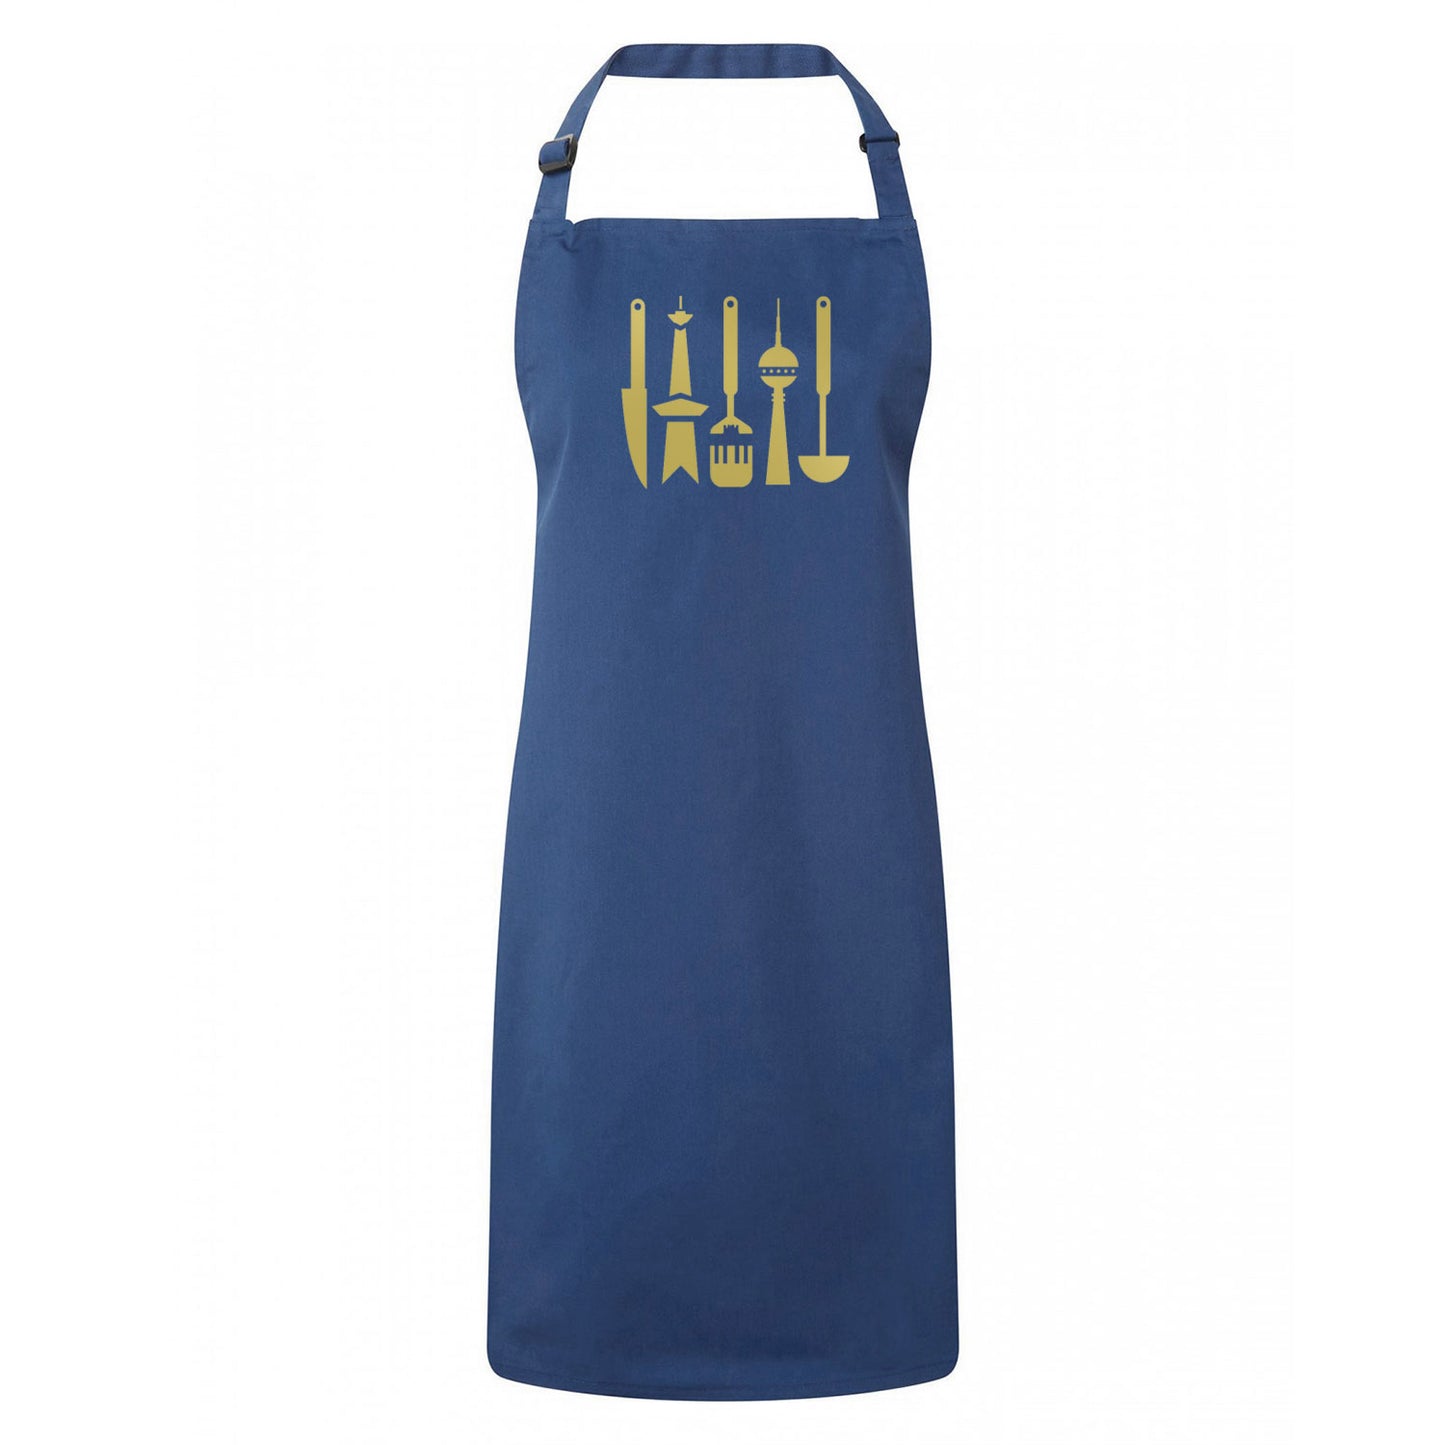 Cooking apron: Berlin kitchen